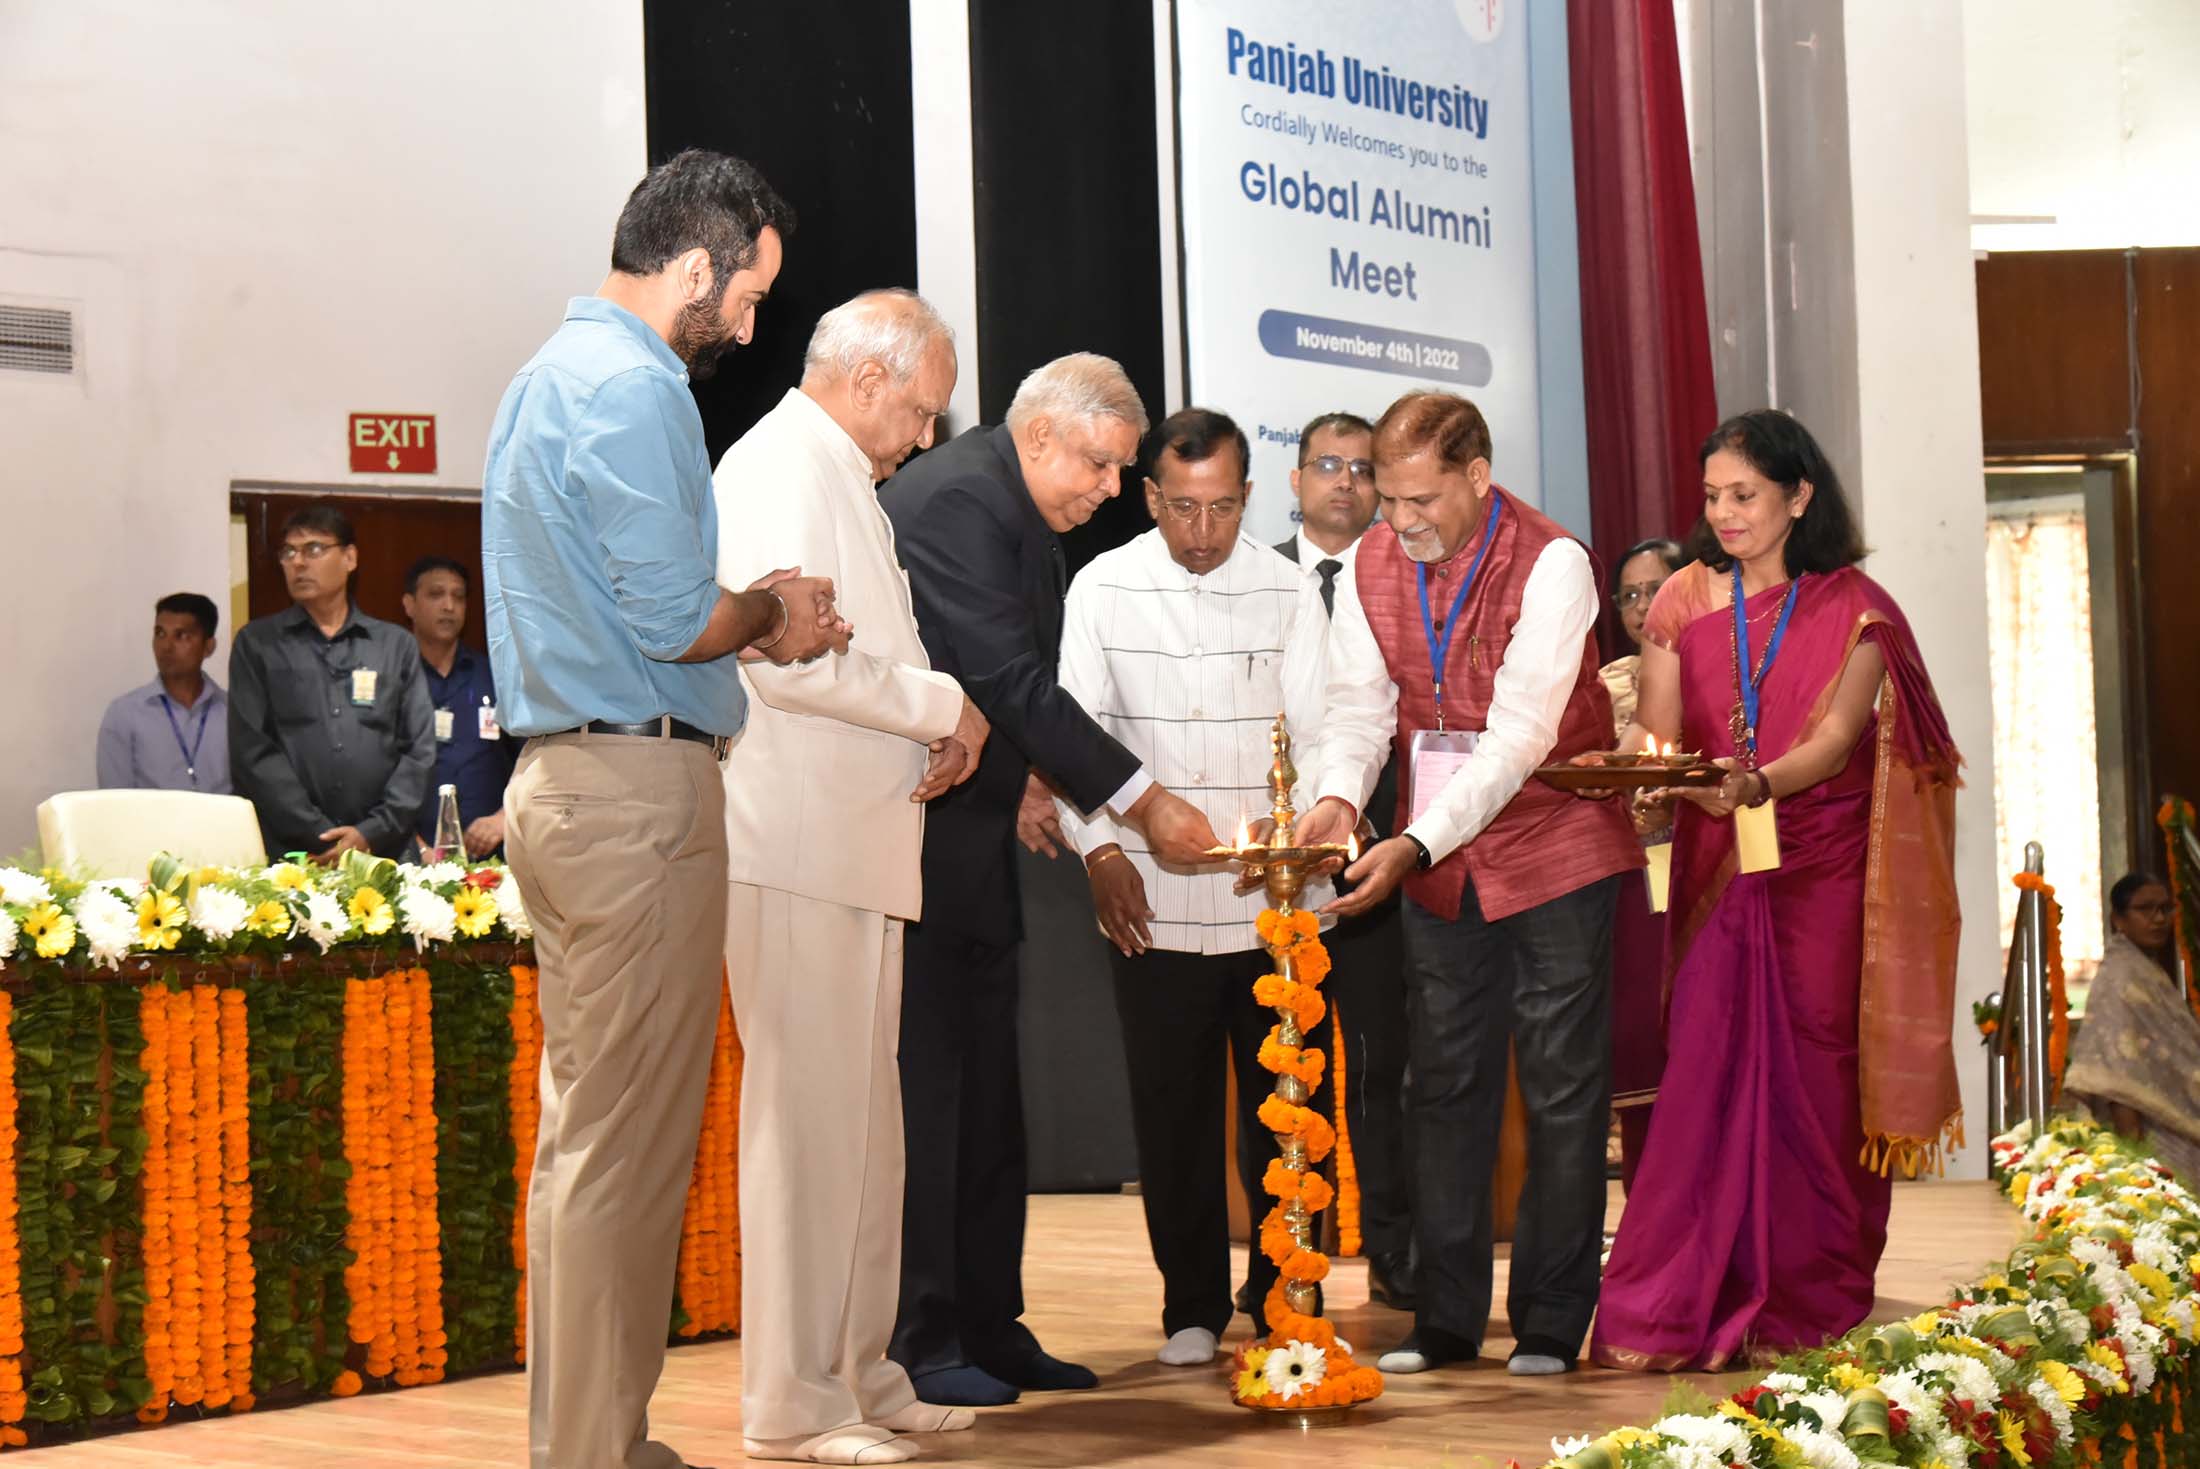 The Vice President, Shri Jagdeep Dhankhar at the Third Global Alumni meet of the Panjab University in Chandigarh on November 4, 2022. Shri Banwarilal Purohit, Governor of Punjab is also seen.